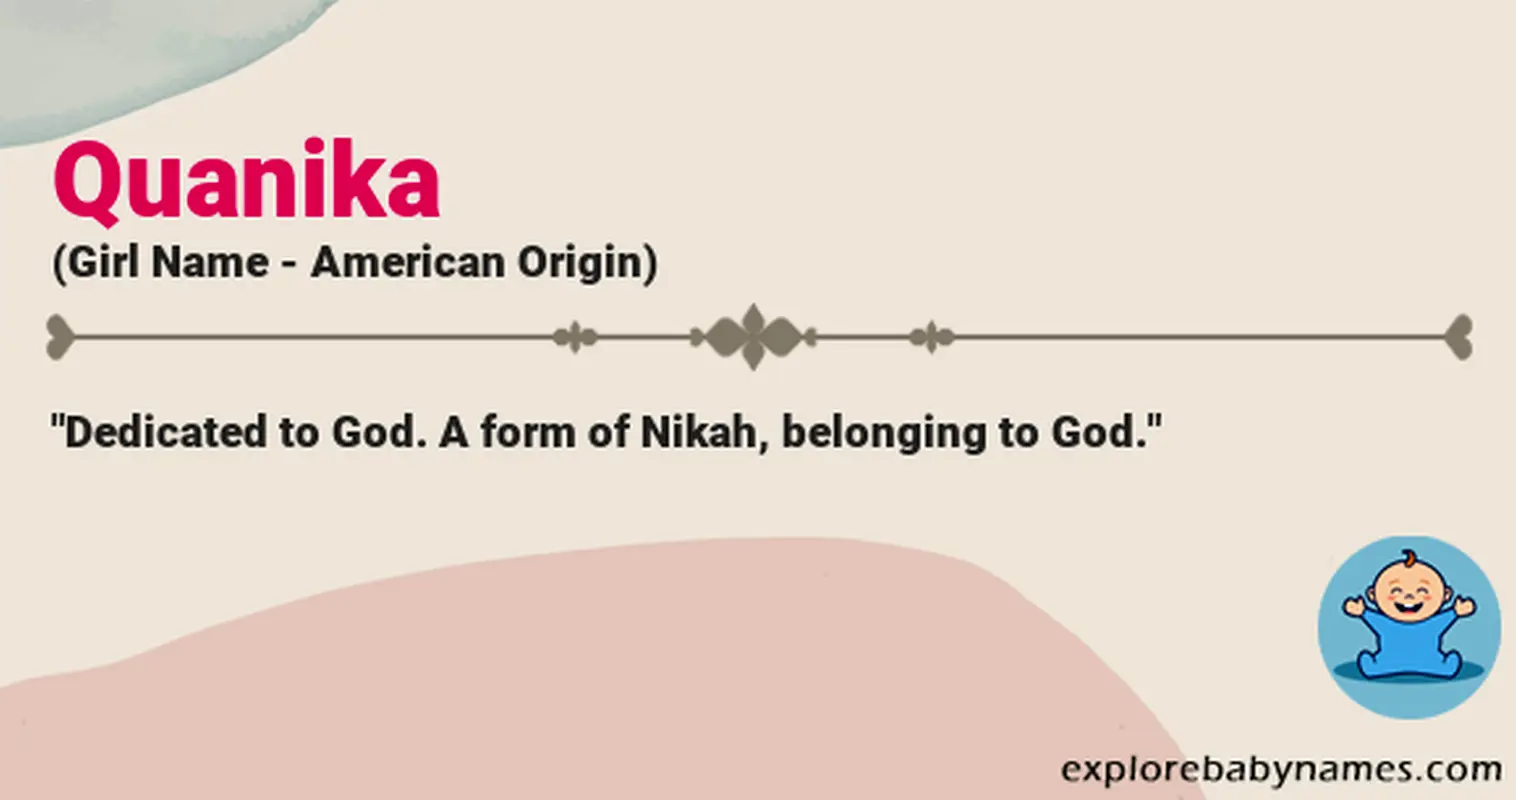 Meaning of Quanika